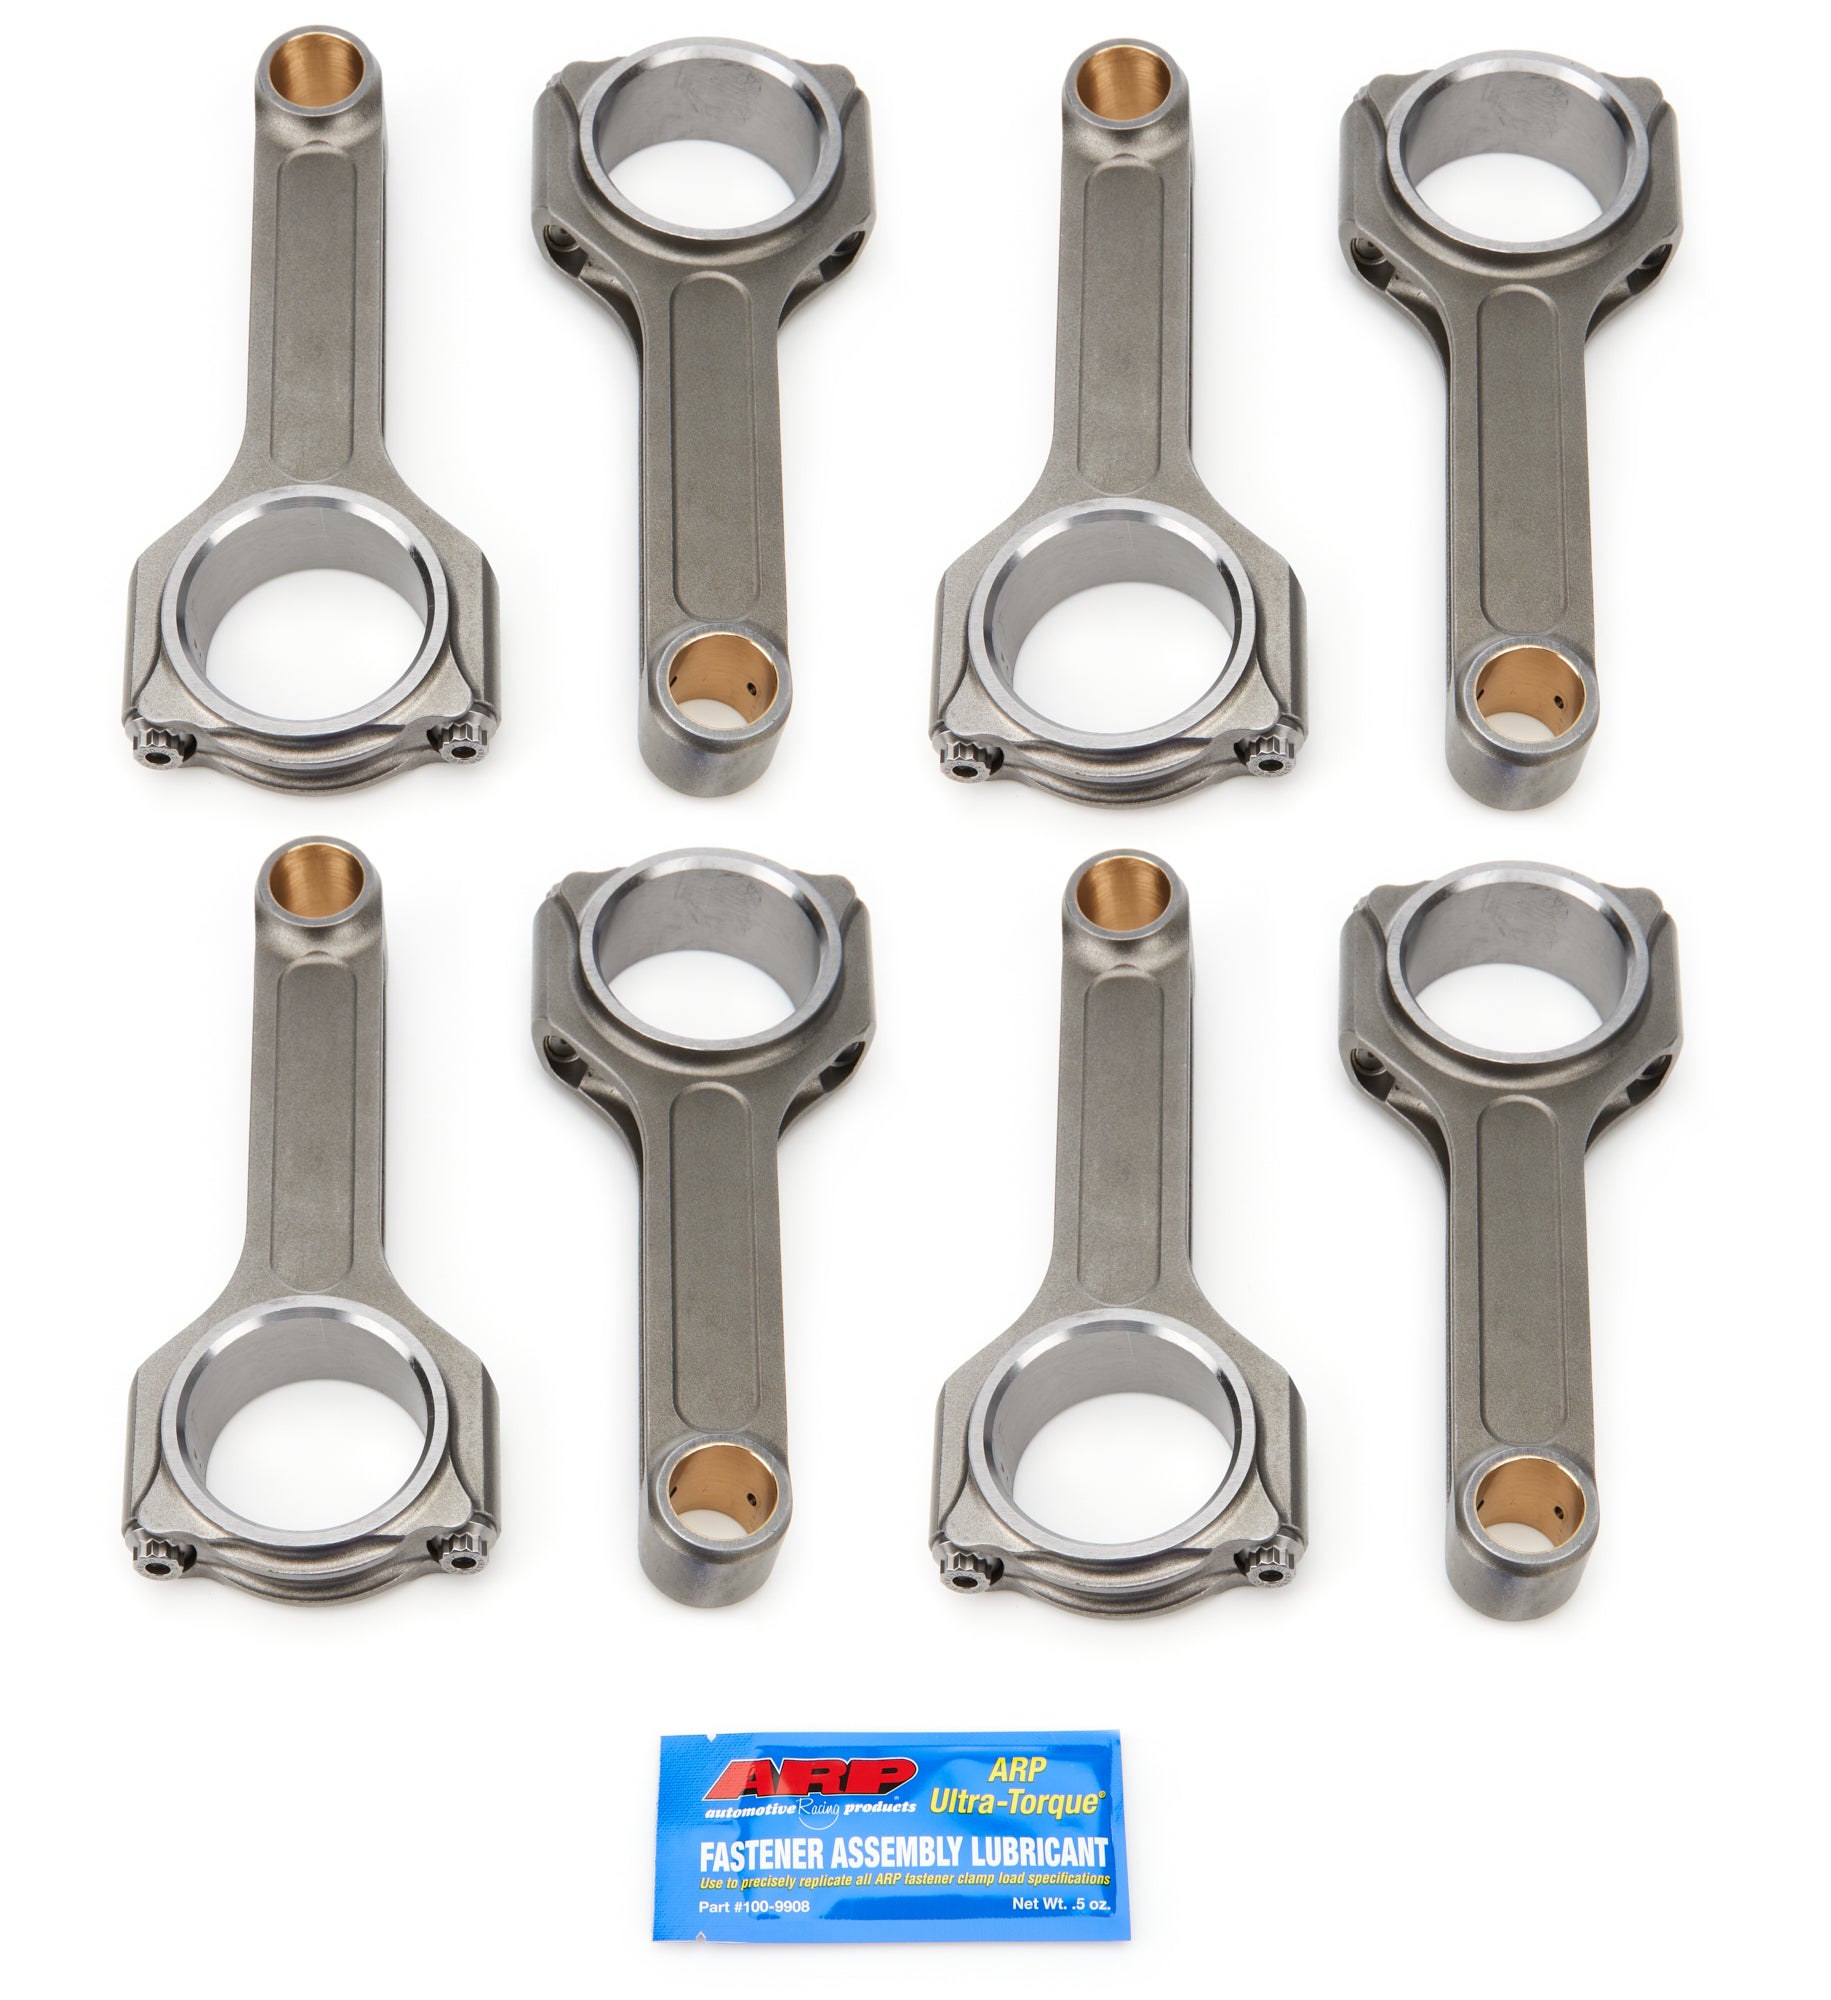 Callies BBC 6.535 H-Beam Rod Set Compstar Extreme Connecting Rods and Components Connecting Rods main image